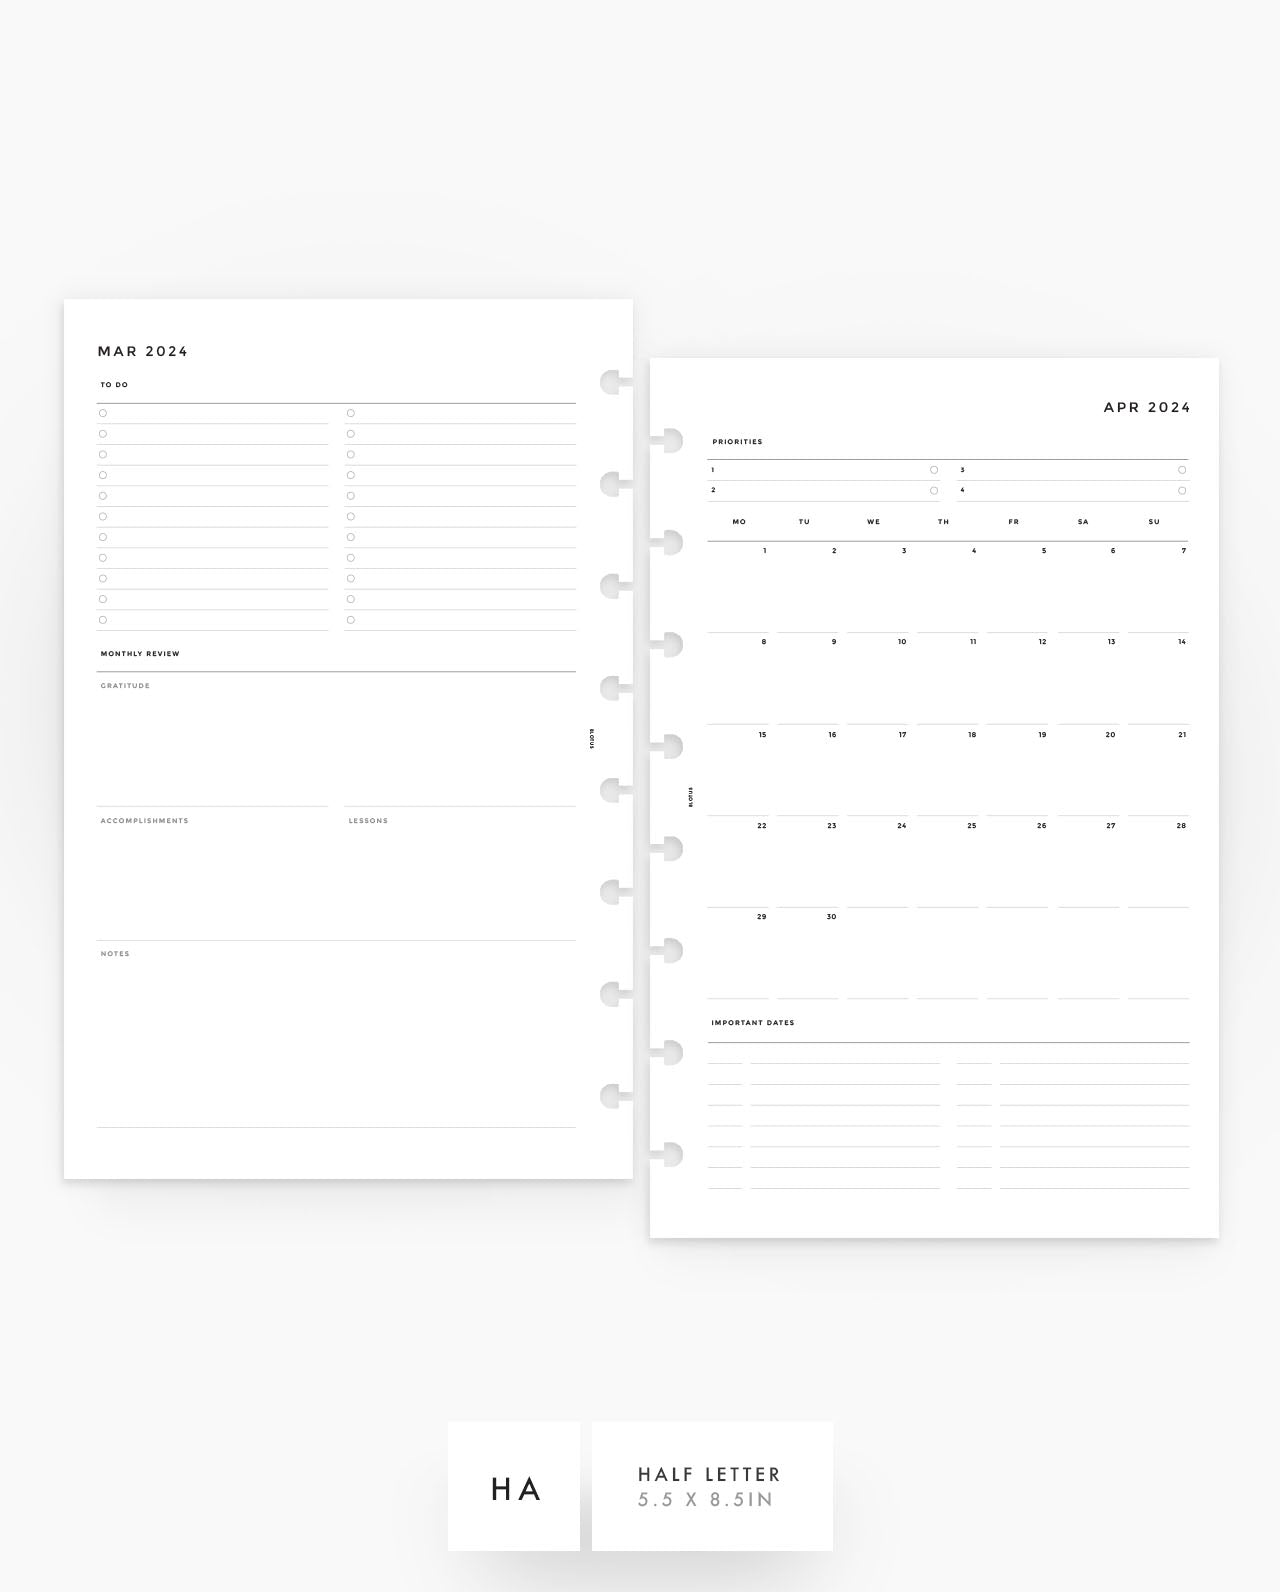 MN003 - 2024 MONTHLY PLANNER & REVIEW - MO2P - Printable PDF